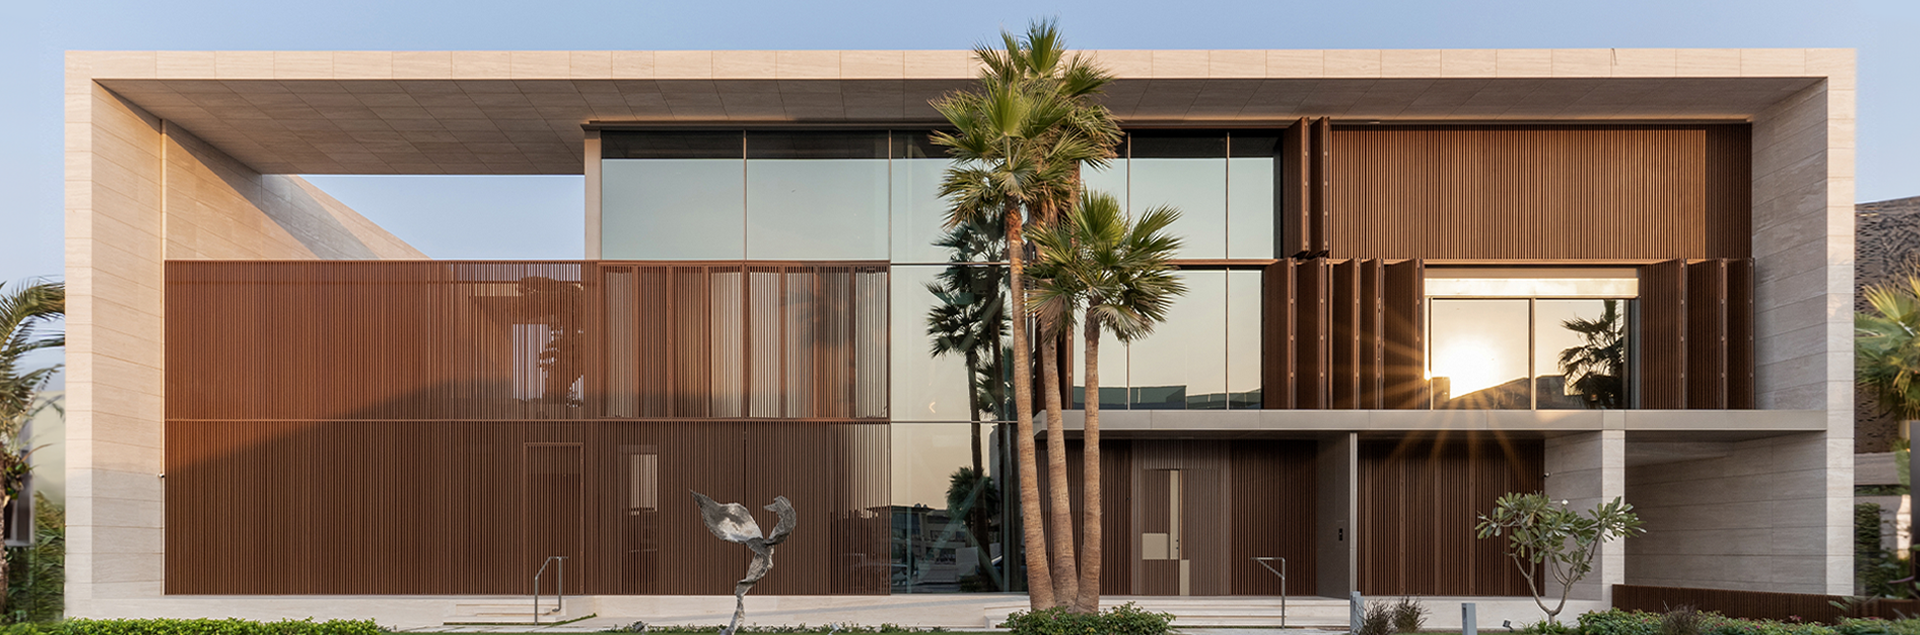 EAA – EMRE AROLAT ARCHITECTURE | Framed Allure Came To Life